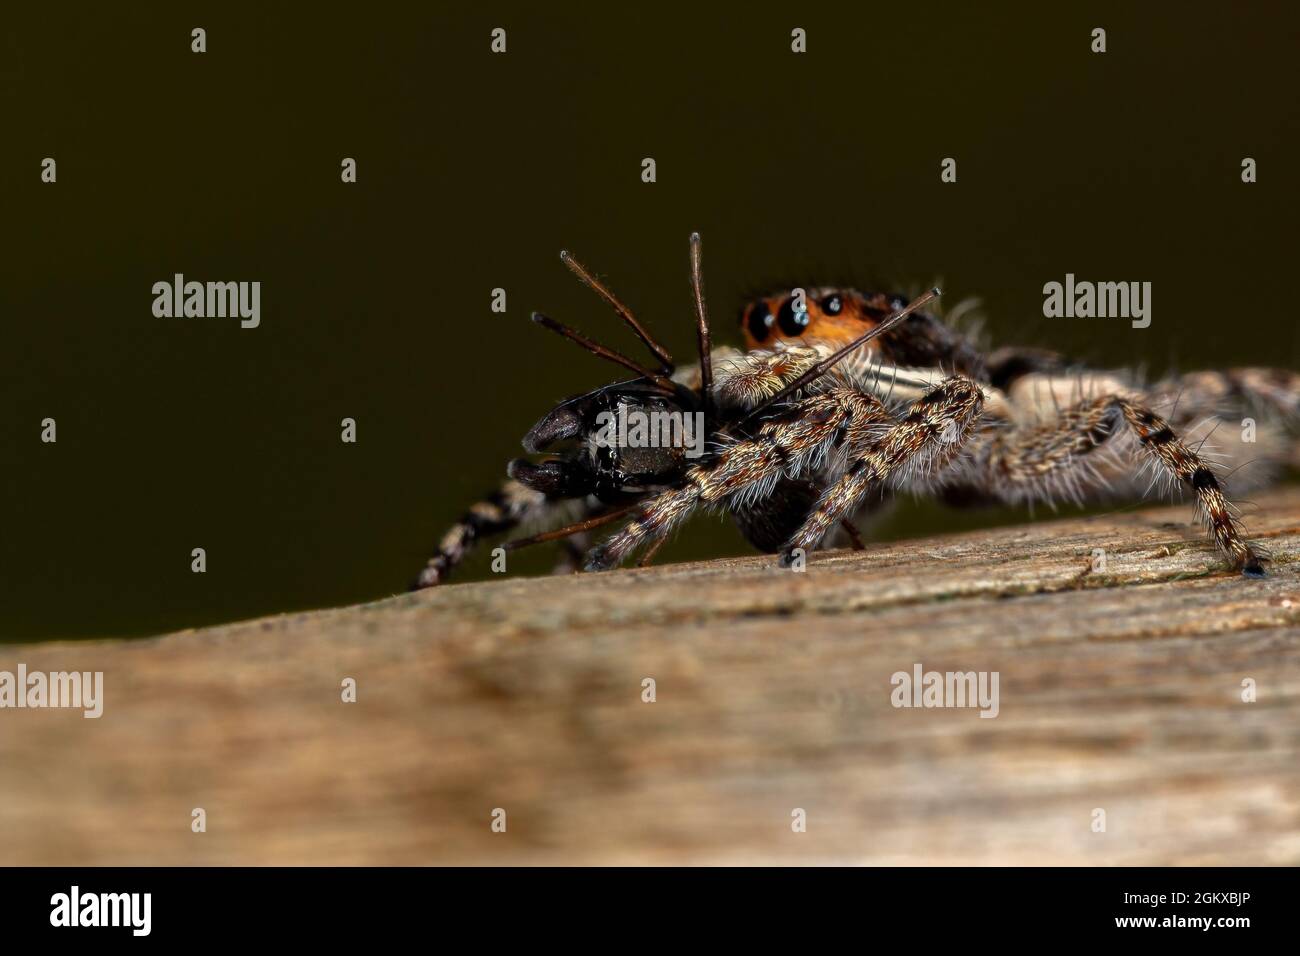 Small Female Male Gray Wall Jumping Spider of the species Menemerus bivittatus preying on a Jumping spider of the genus Sarinda Stock Photo